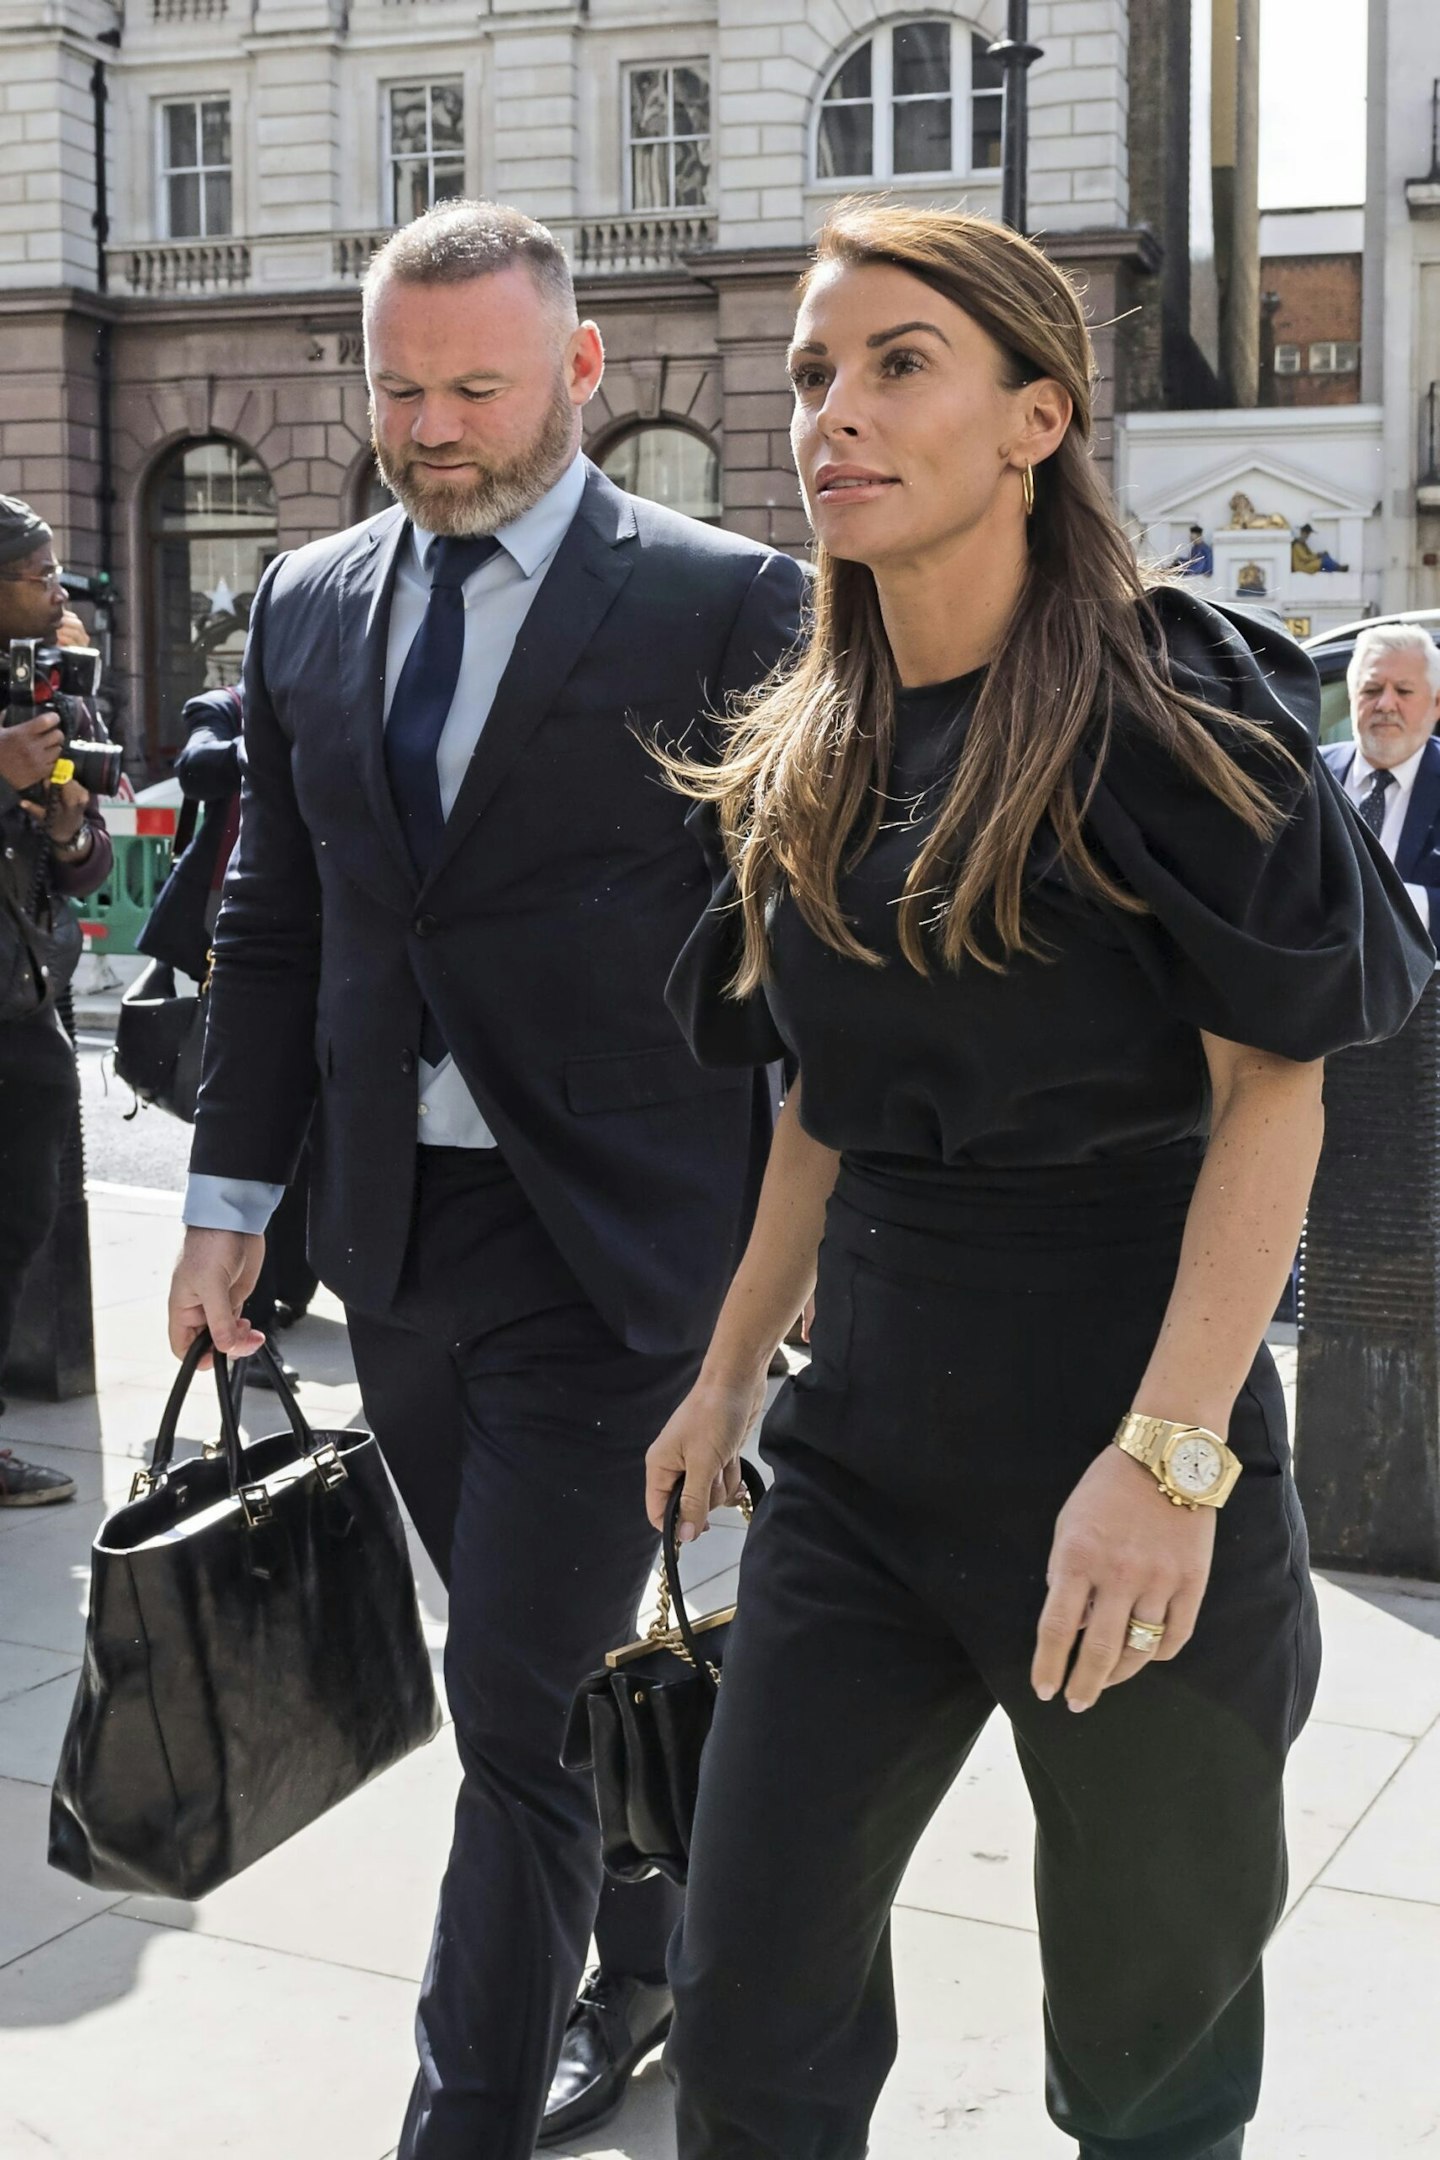 Coleen Rooney arrives at court with husband Wayne